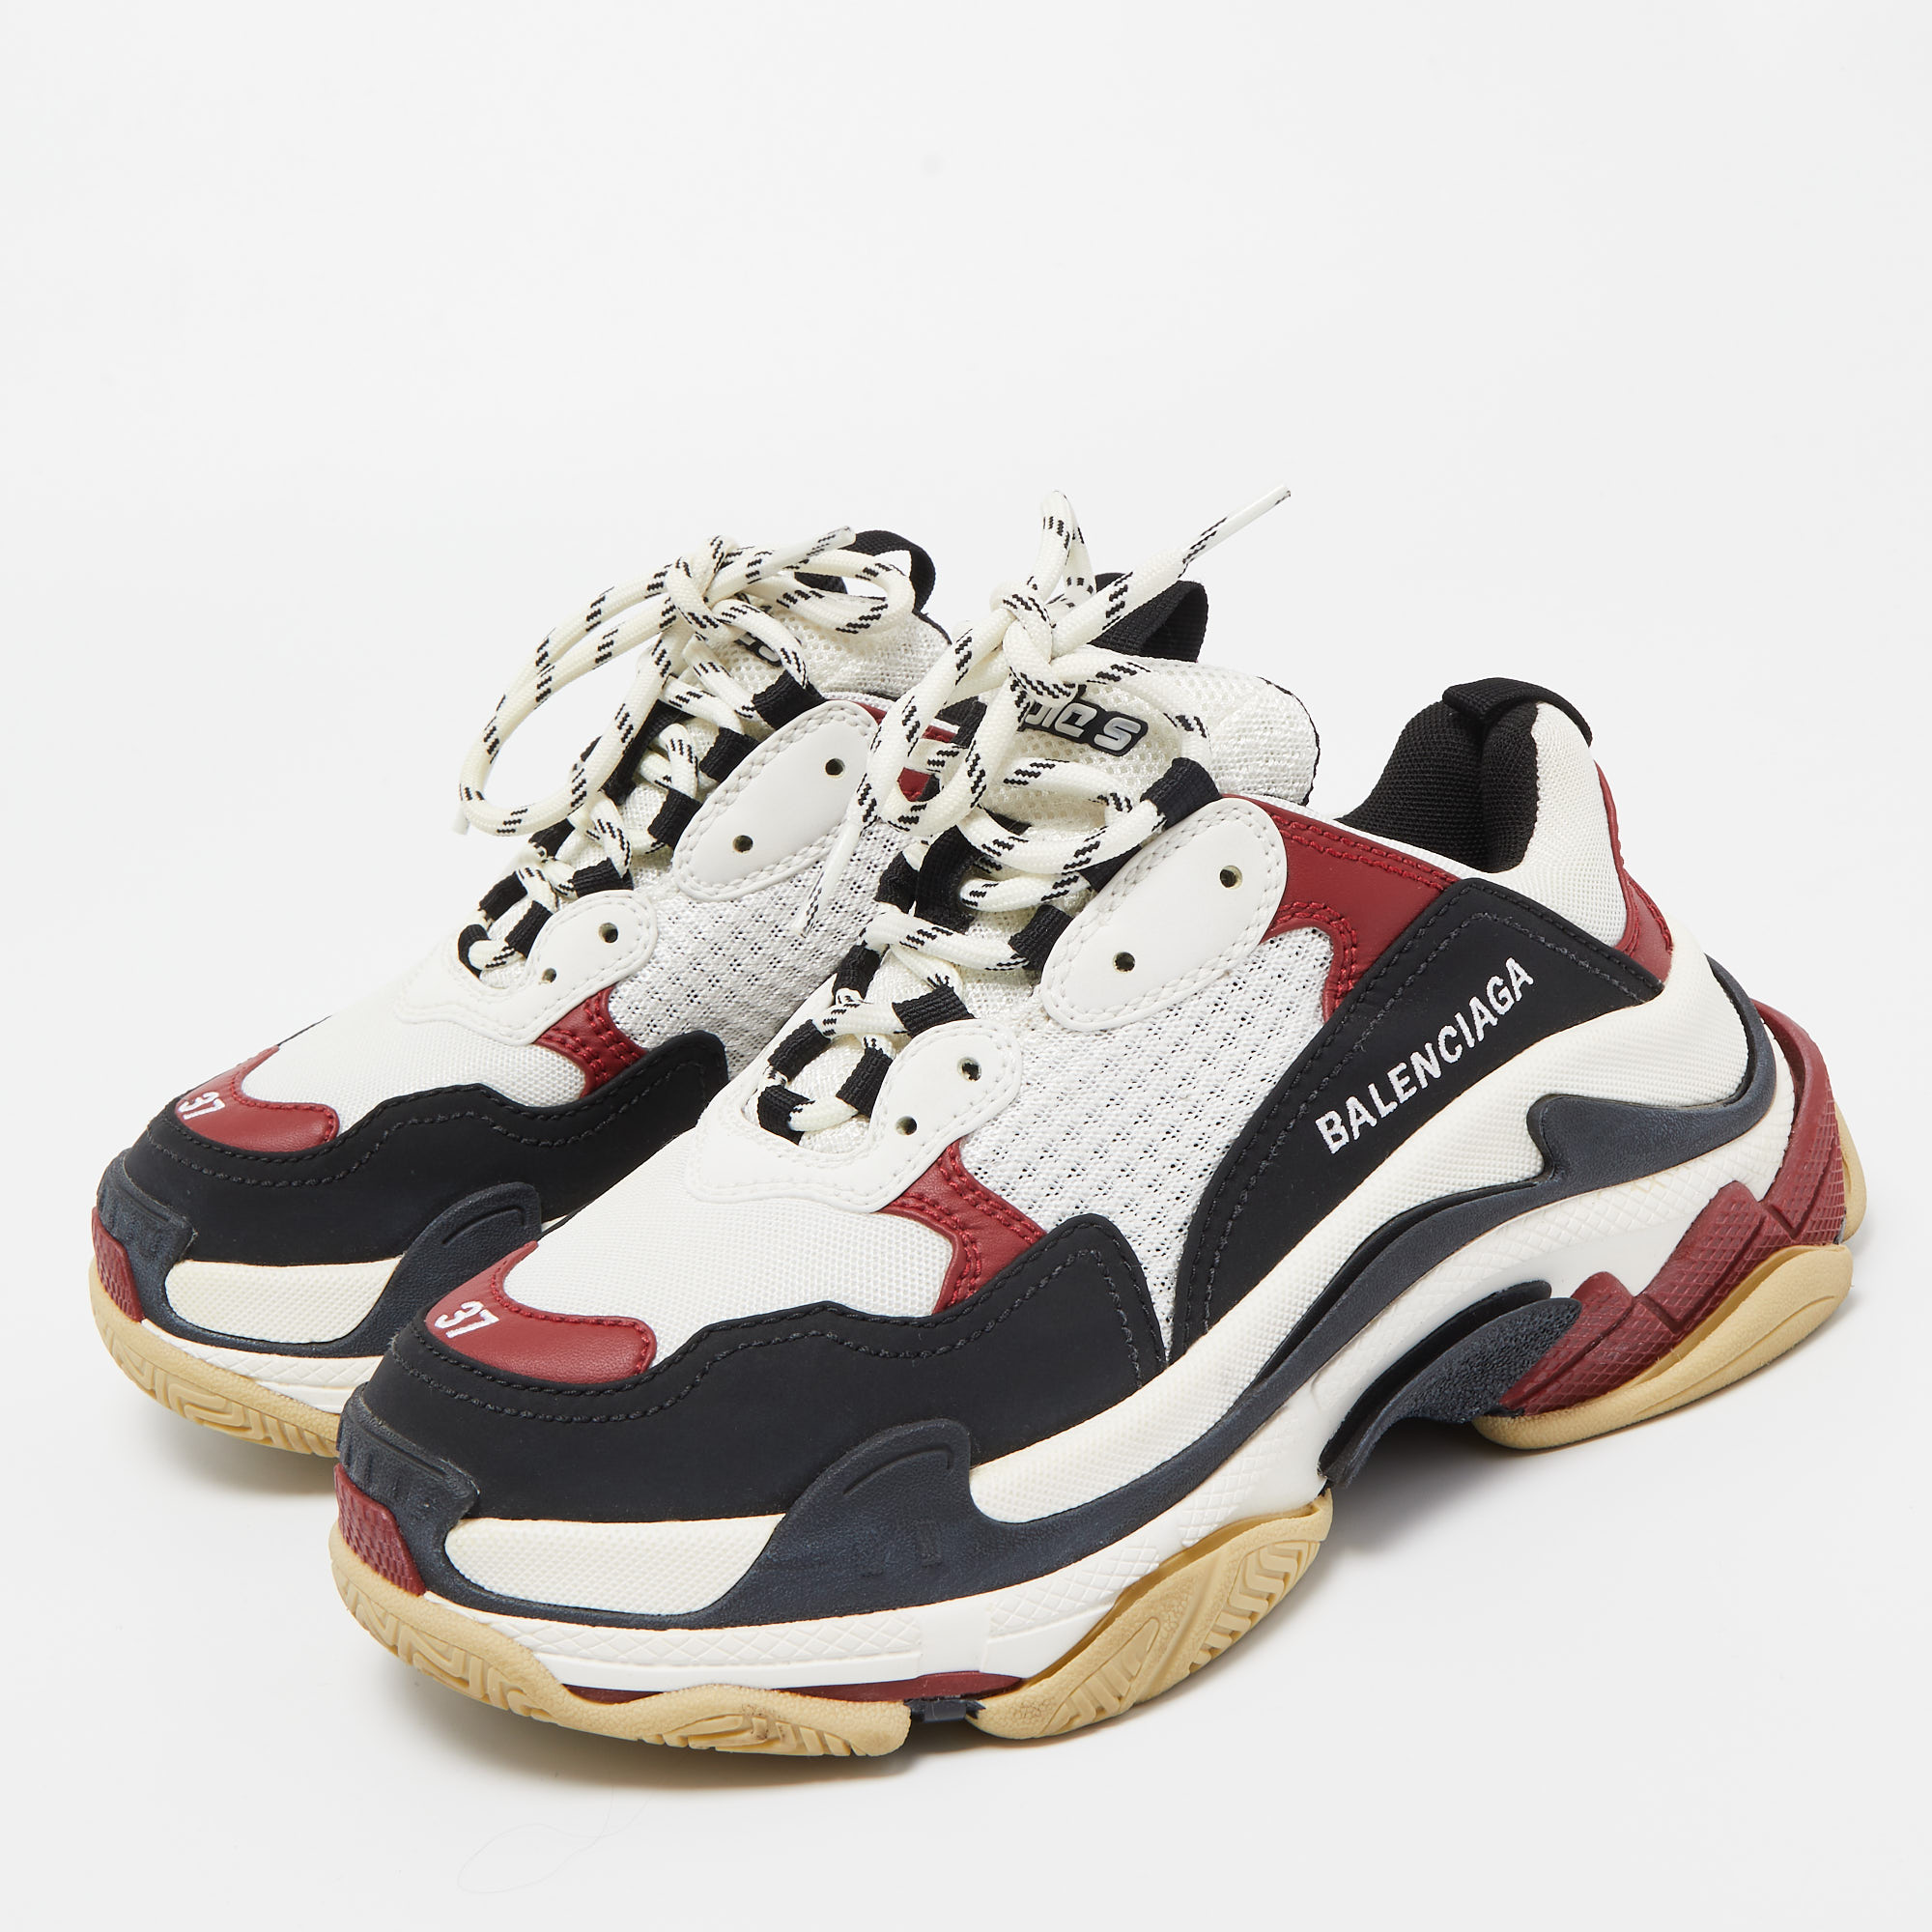 

Balenciaga Tricolor Nubuck Leather and Mesh Triple S Low Top Sneakers Size, Multicolor